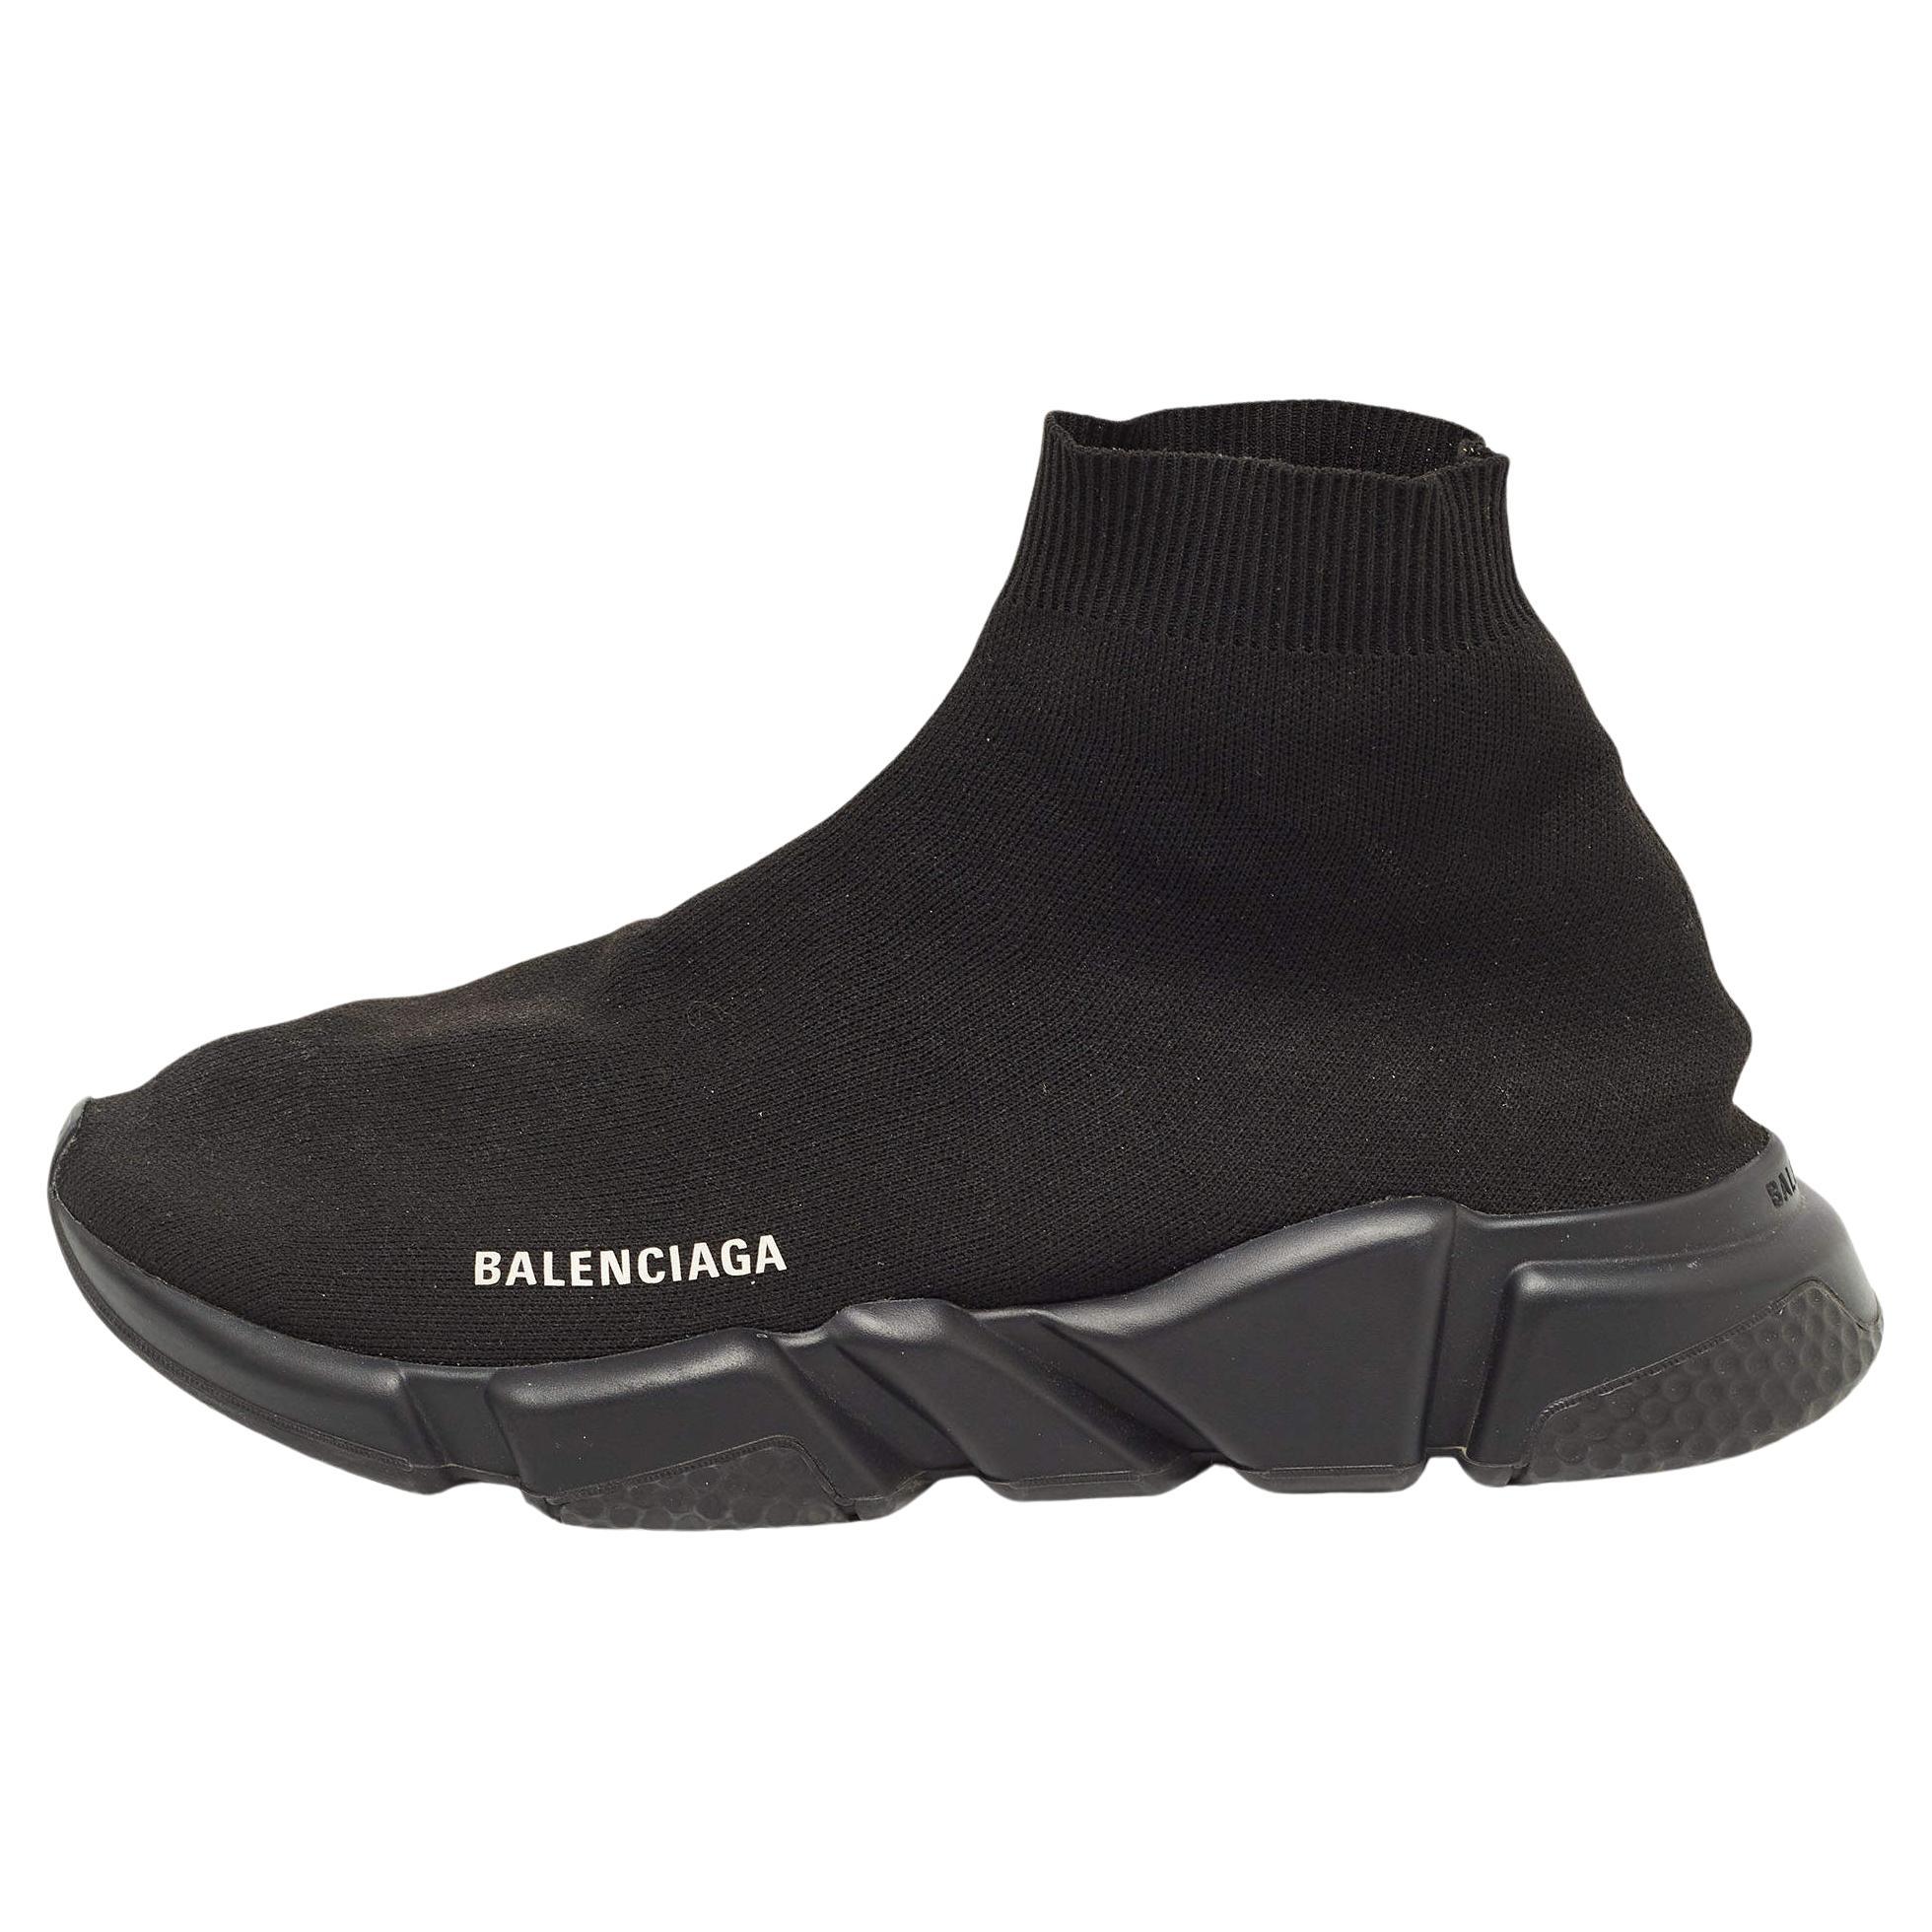 Balenciaga Black Knit Fabric Speed Trainer High Top Sneakers Size 43 For Sale